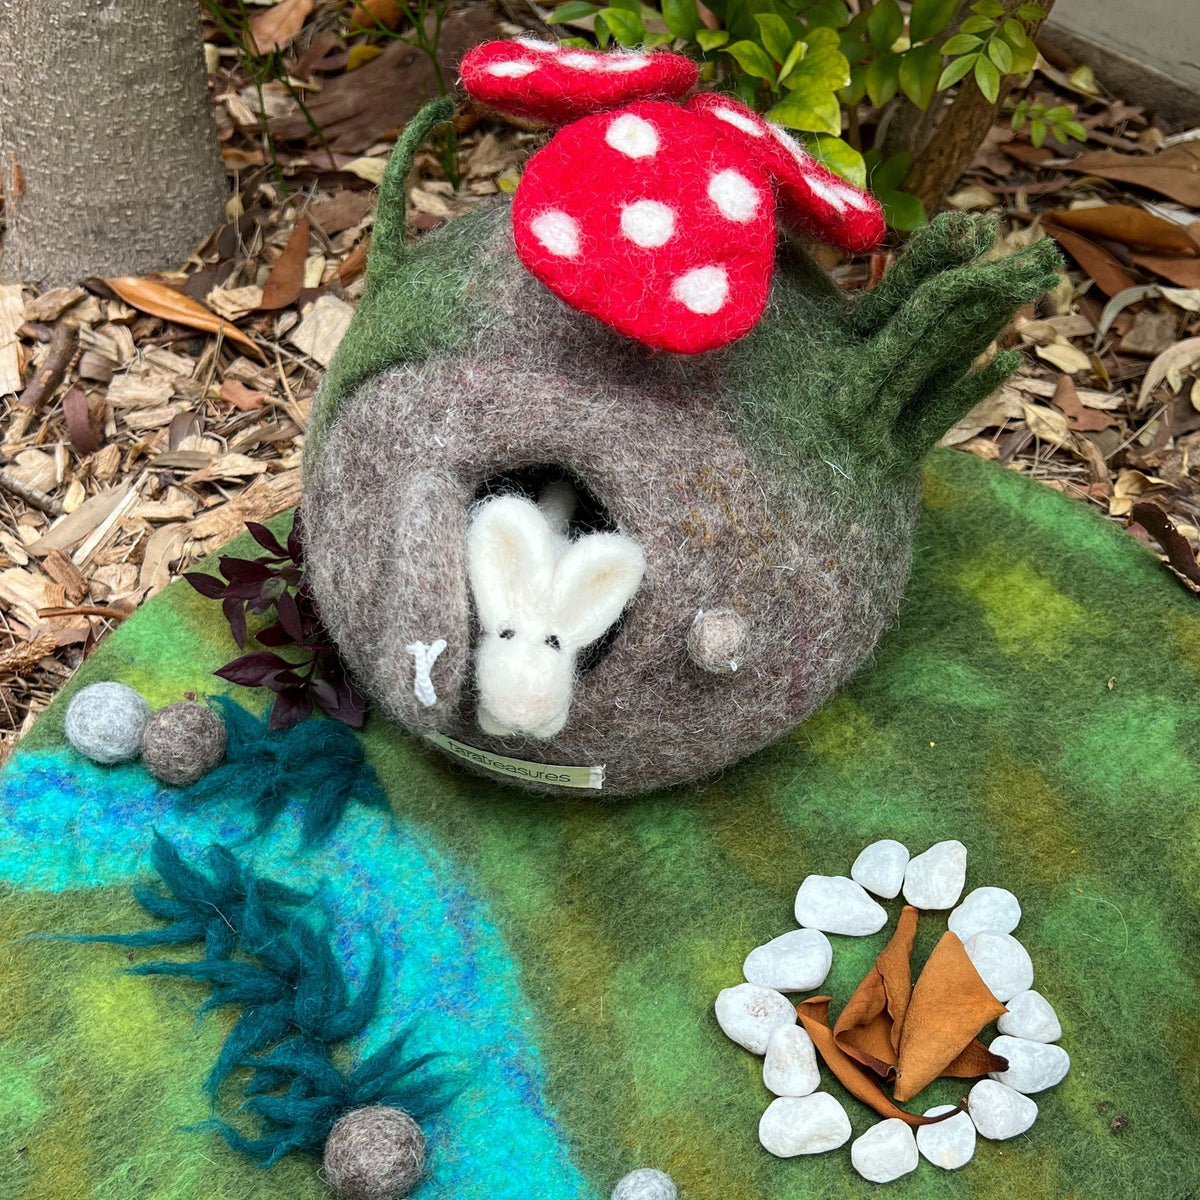 The Curated Parcel - Felt Fairy Toadstool House with Rabbit Toy 